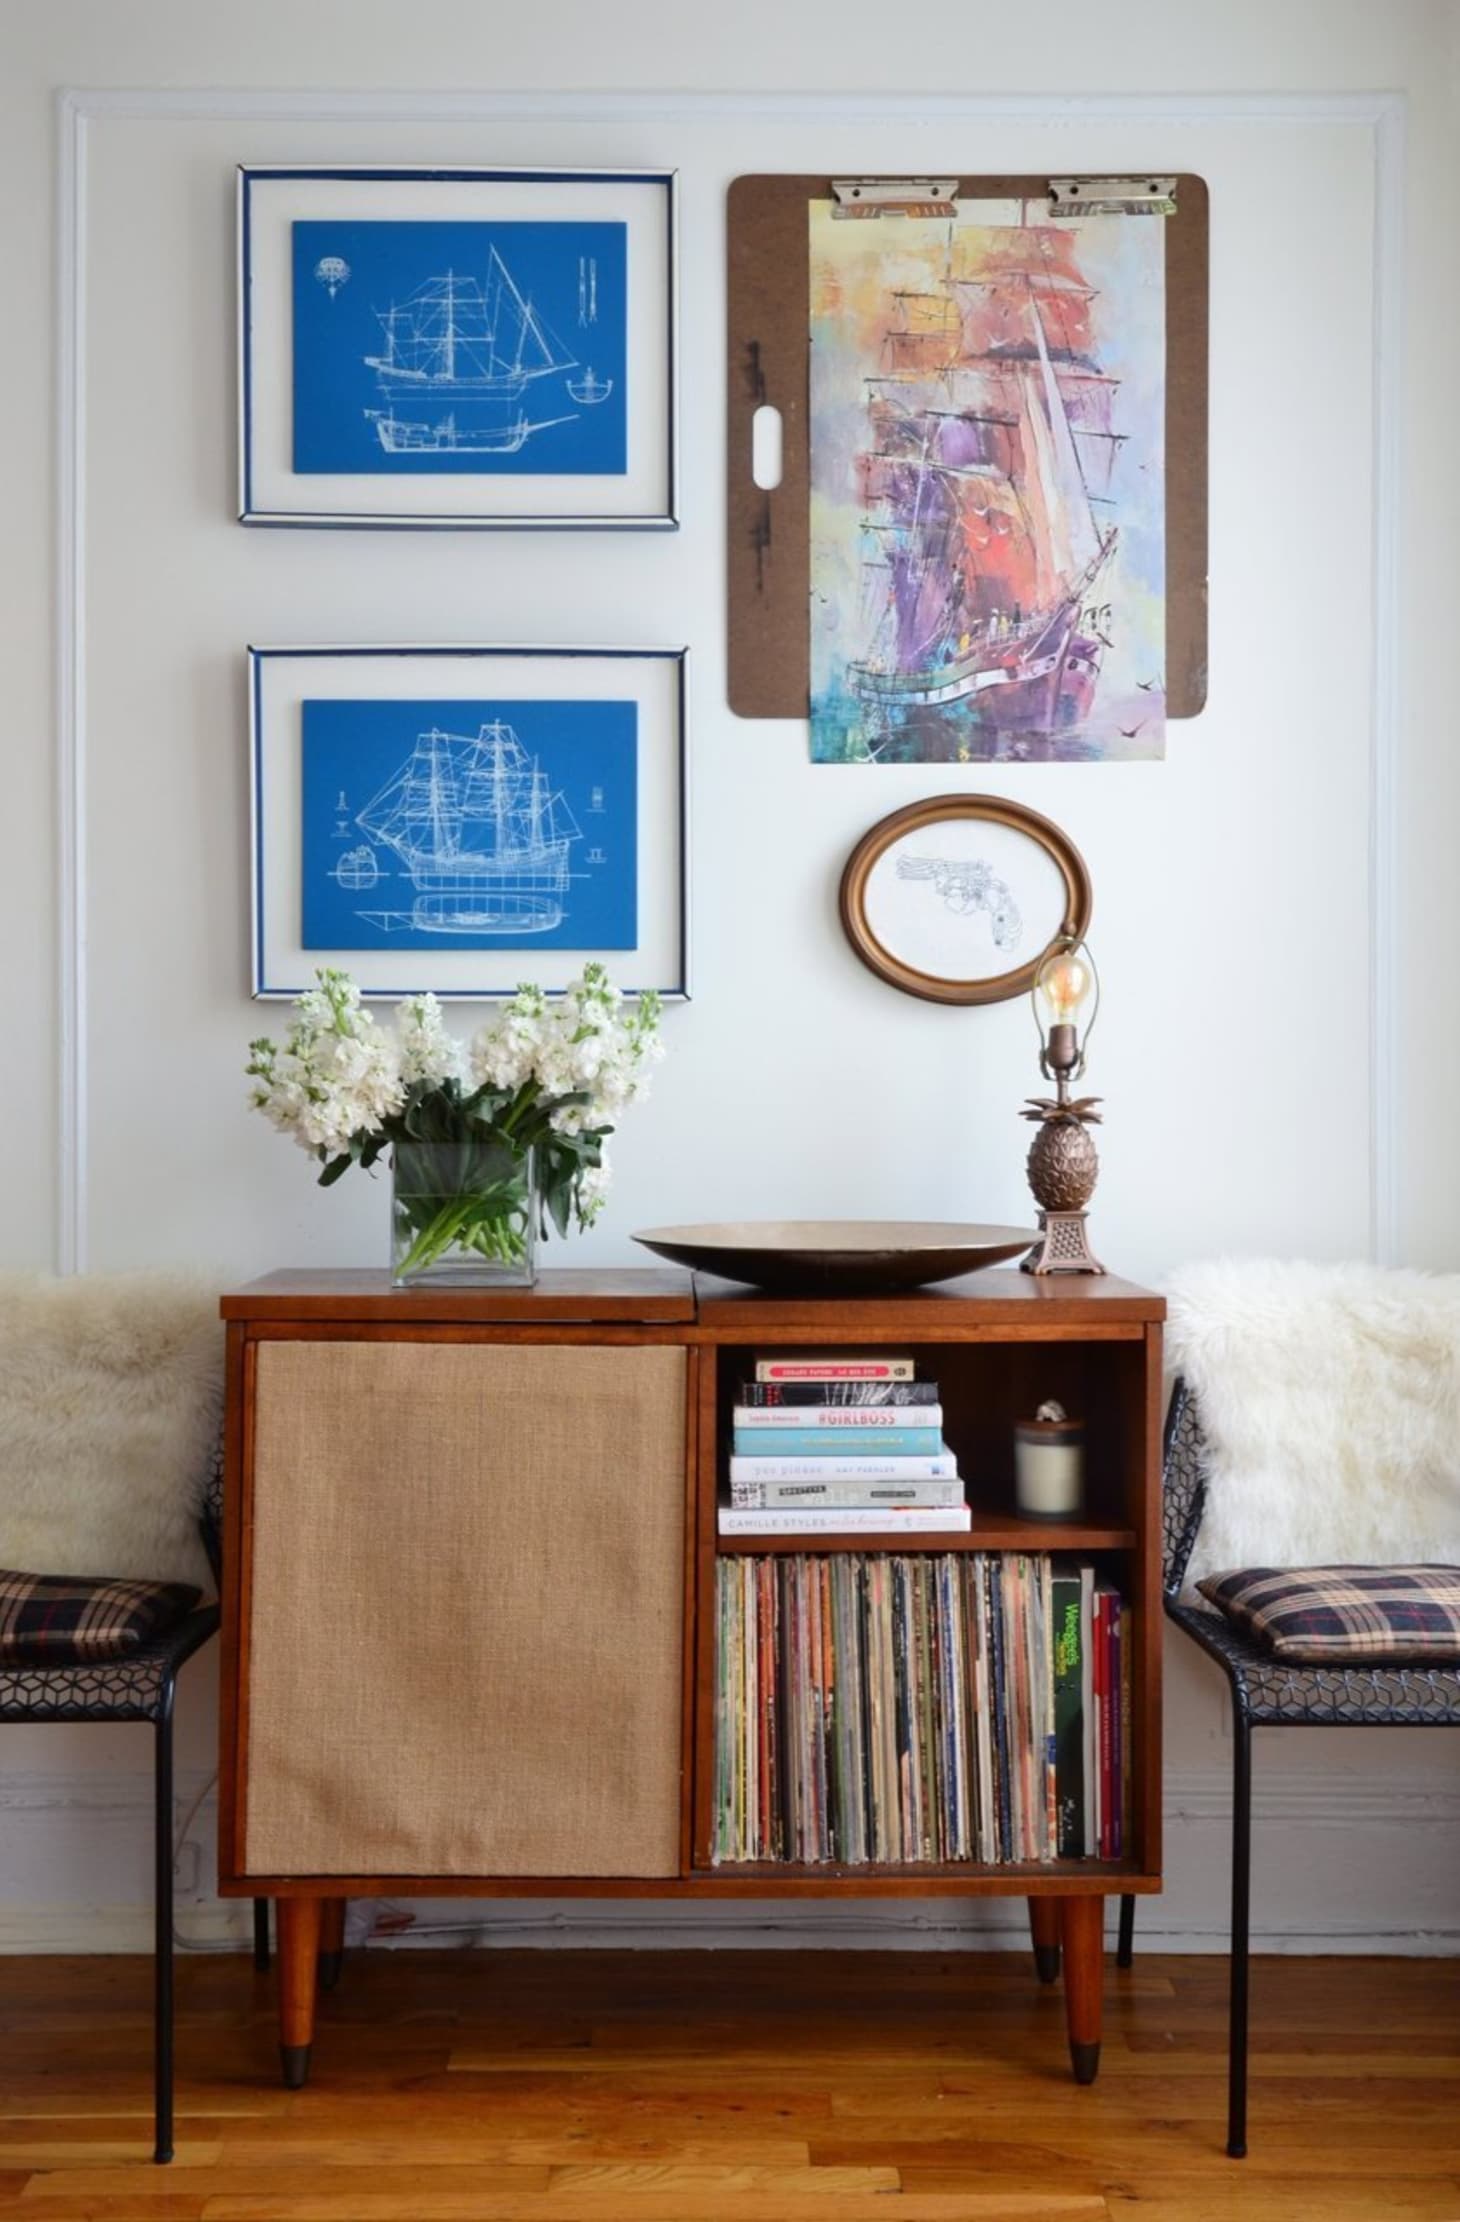 The 10 Commandments of Decorating Your Rental Apartment